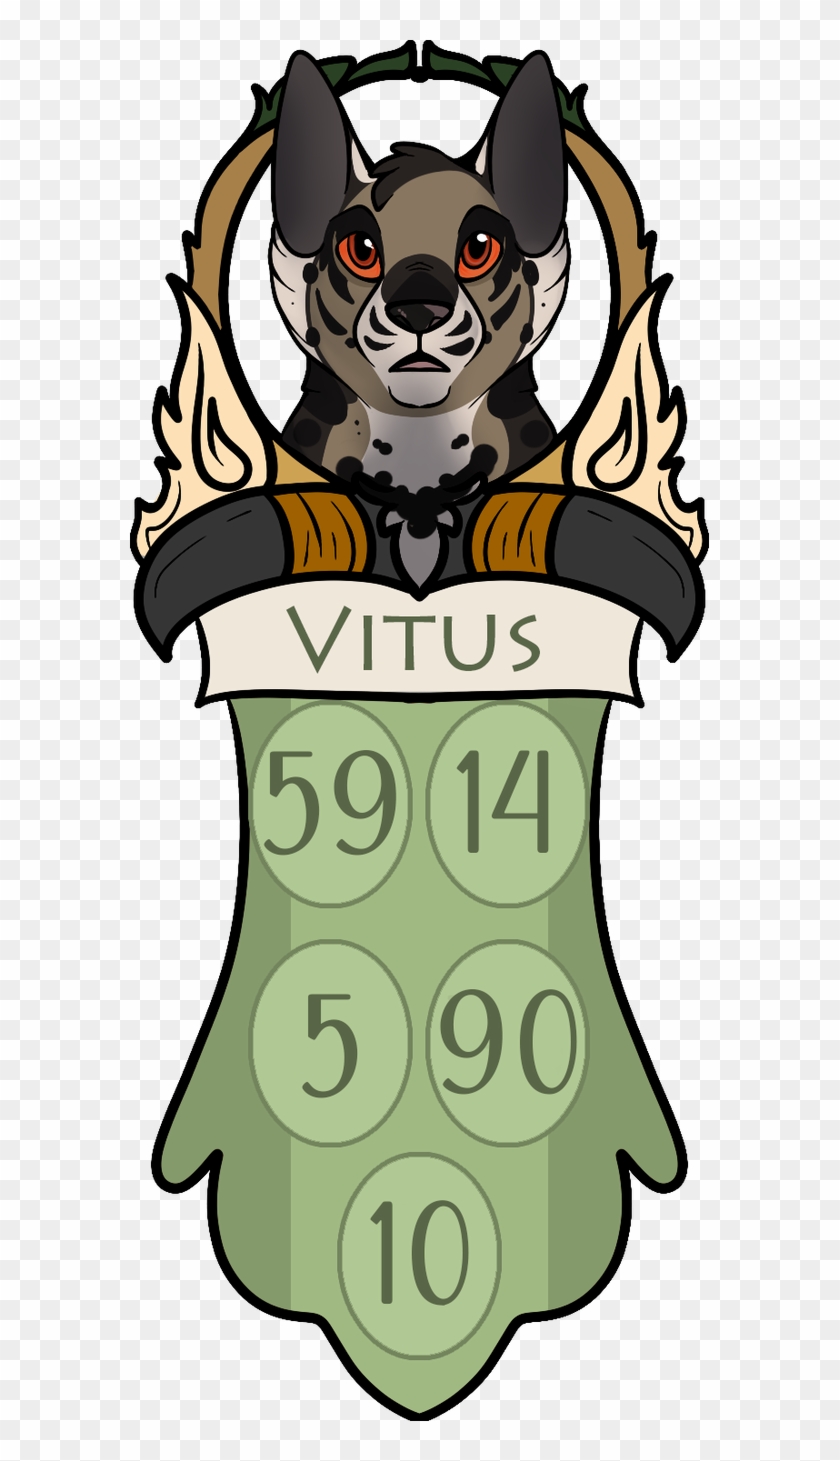 Vitus Hades By Tms-admin - Vitus Hades By Tms-admin #1605827